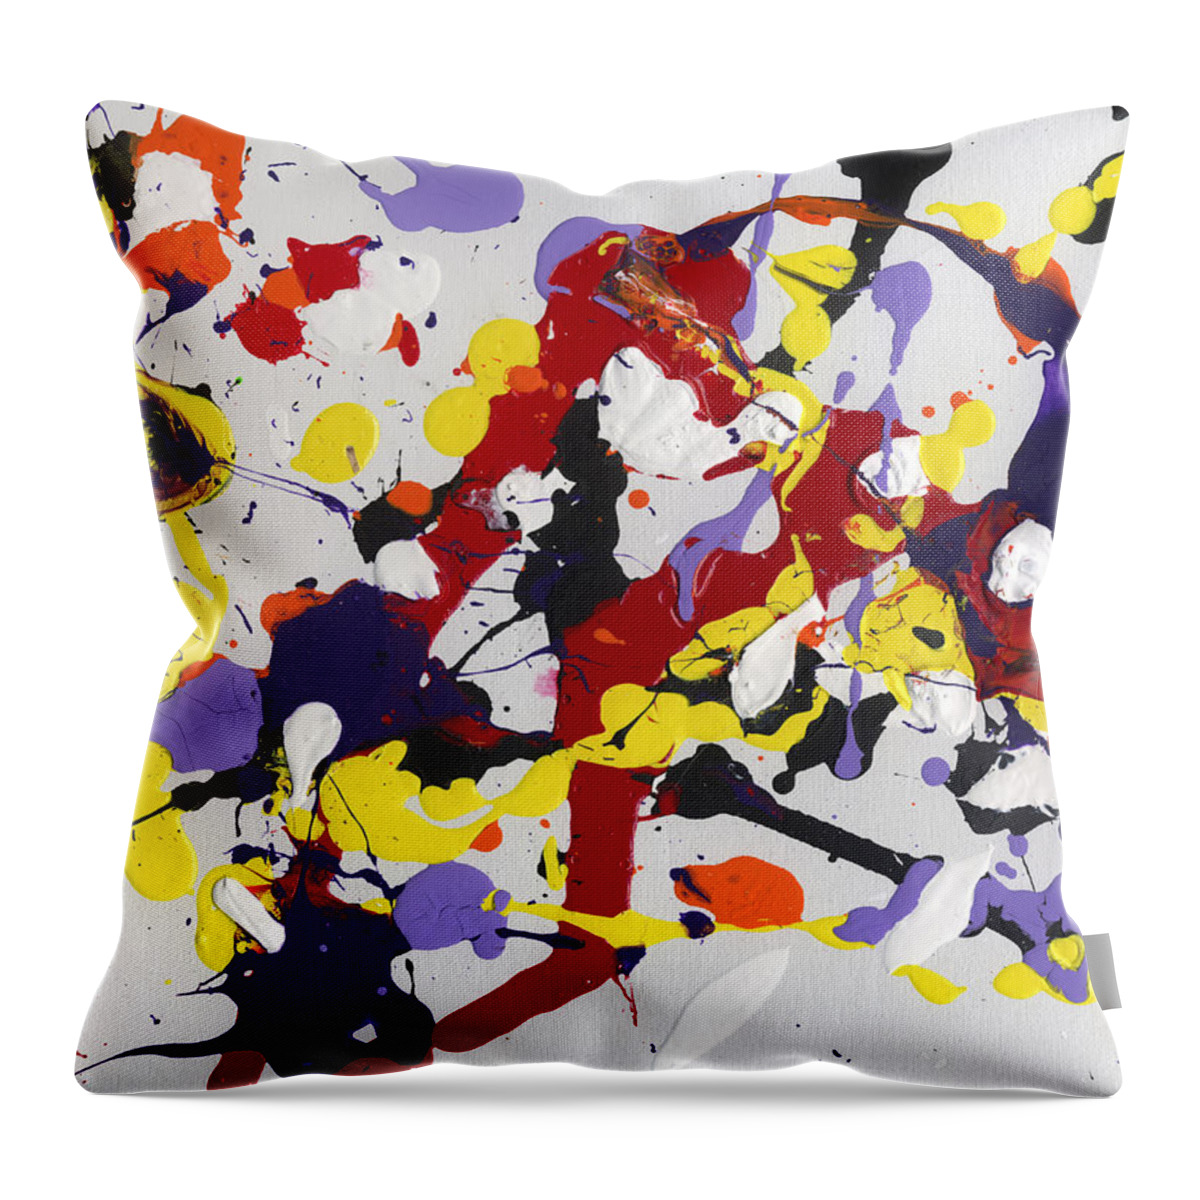 Splatter Throw Pillow featuring the painting Adulthood by Phil Strang